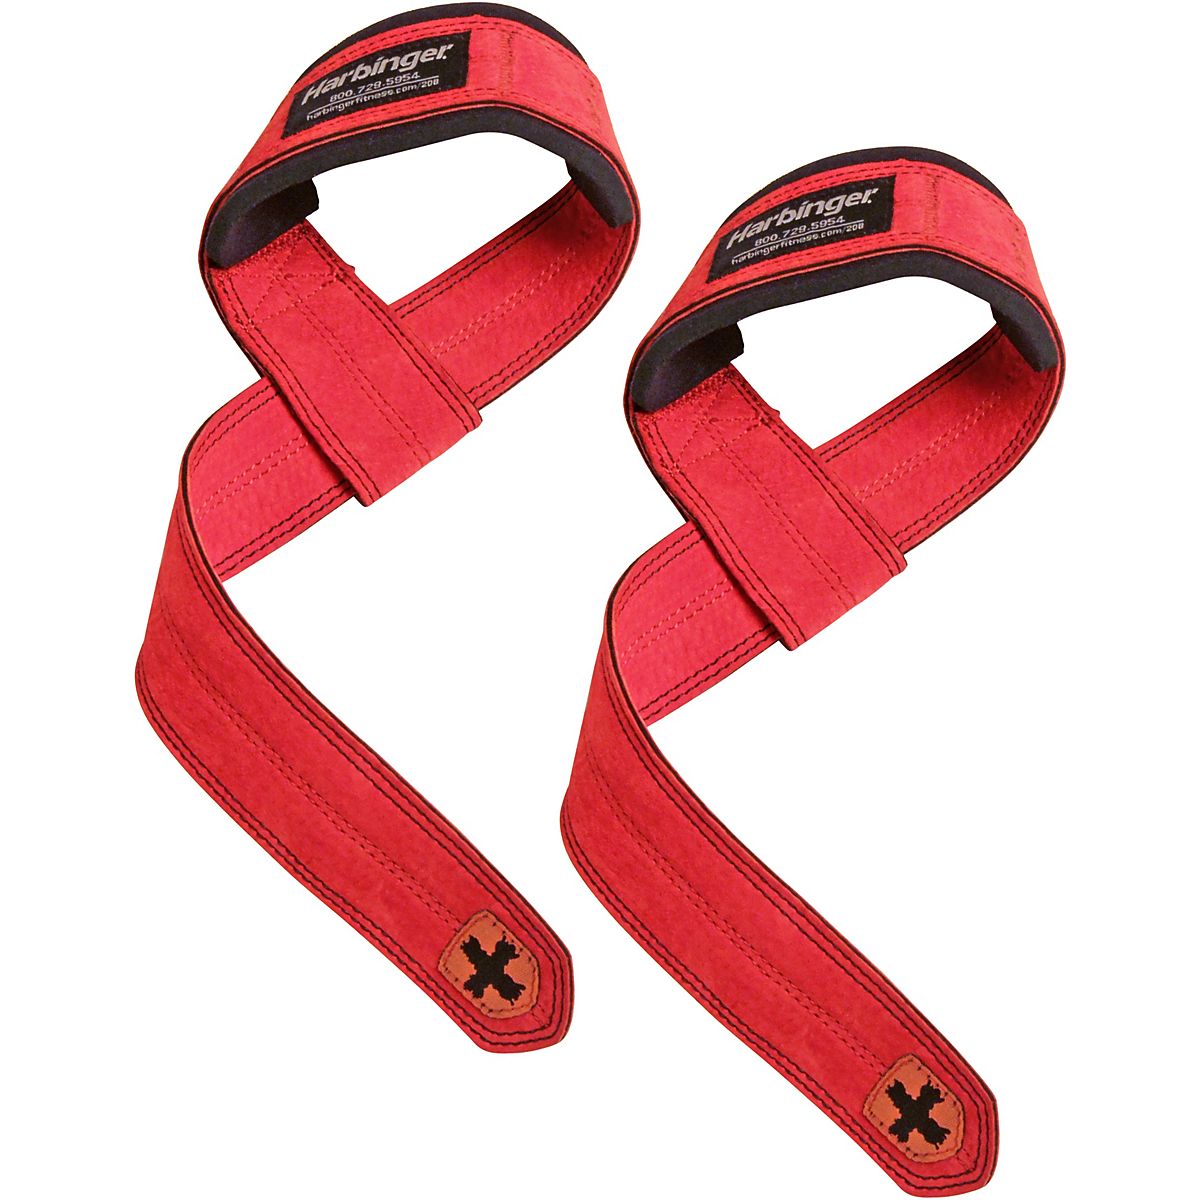 Harbinger Adults' Padded Leather Lifting Straps | Academy